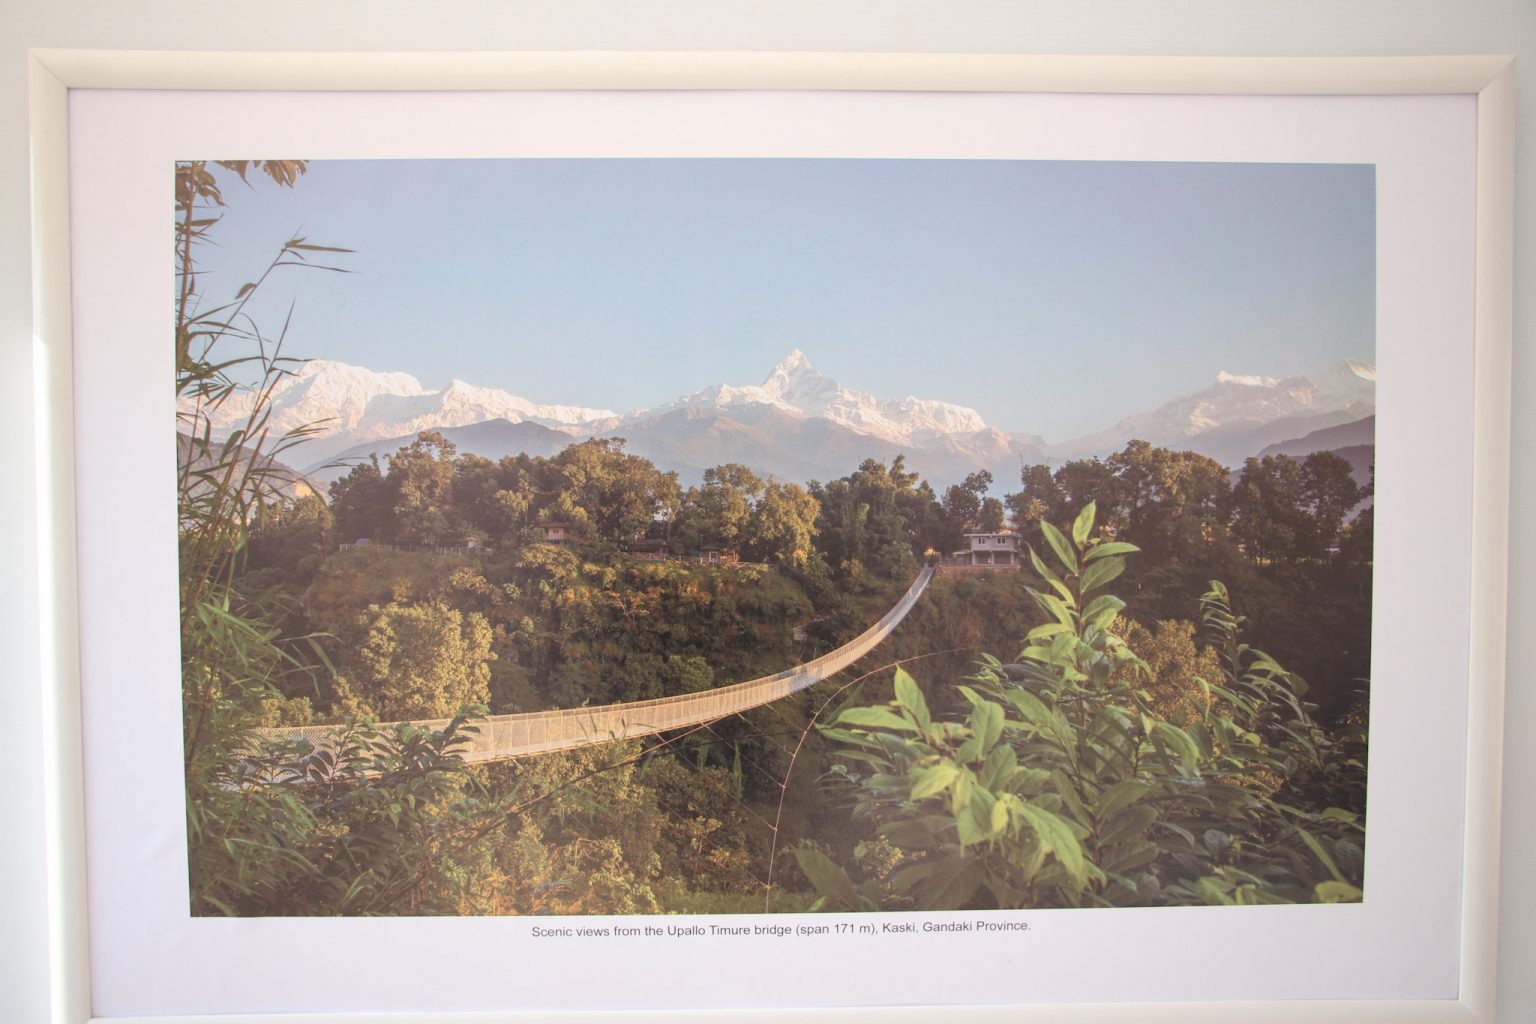 Photo exhibition on the occasion of construction of more than 10,000 suspension bridges in Nepal (photos)